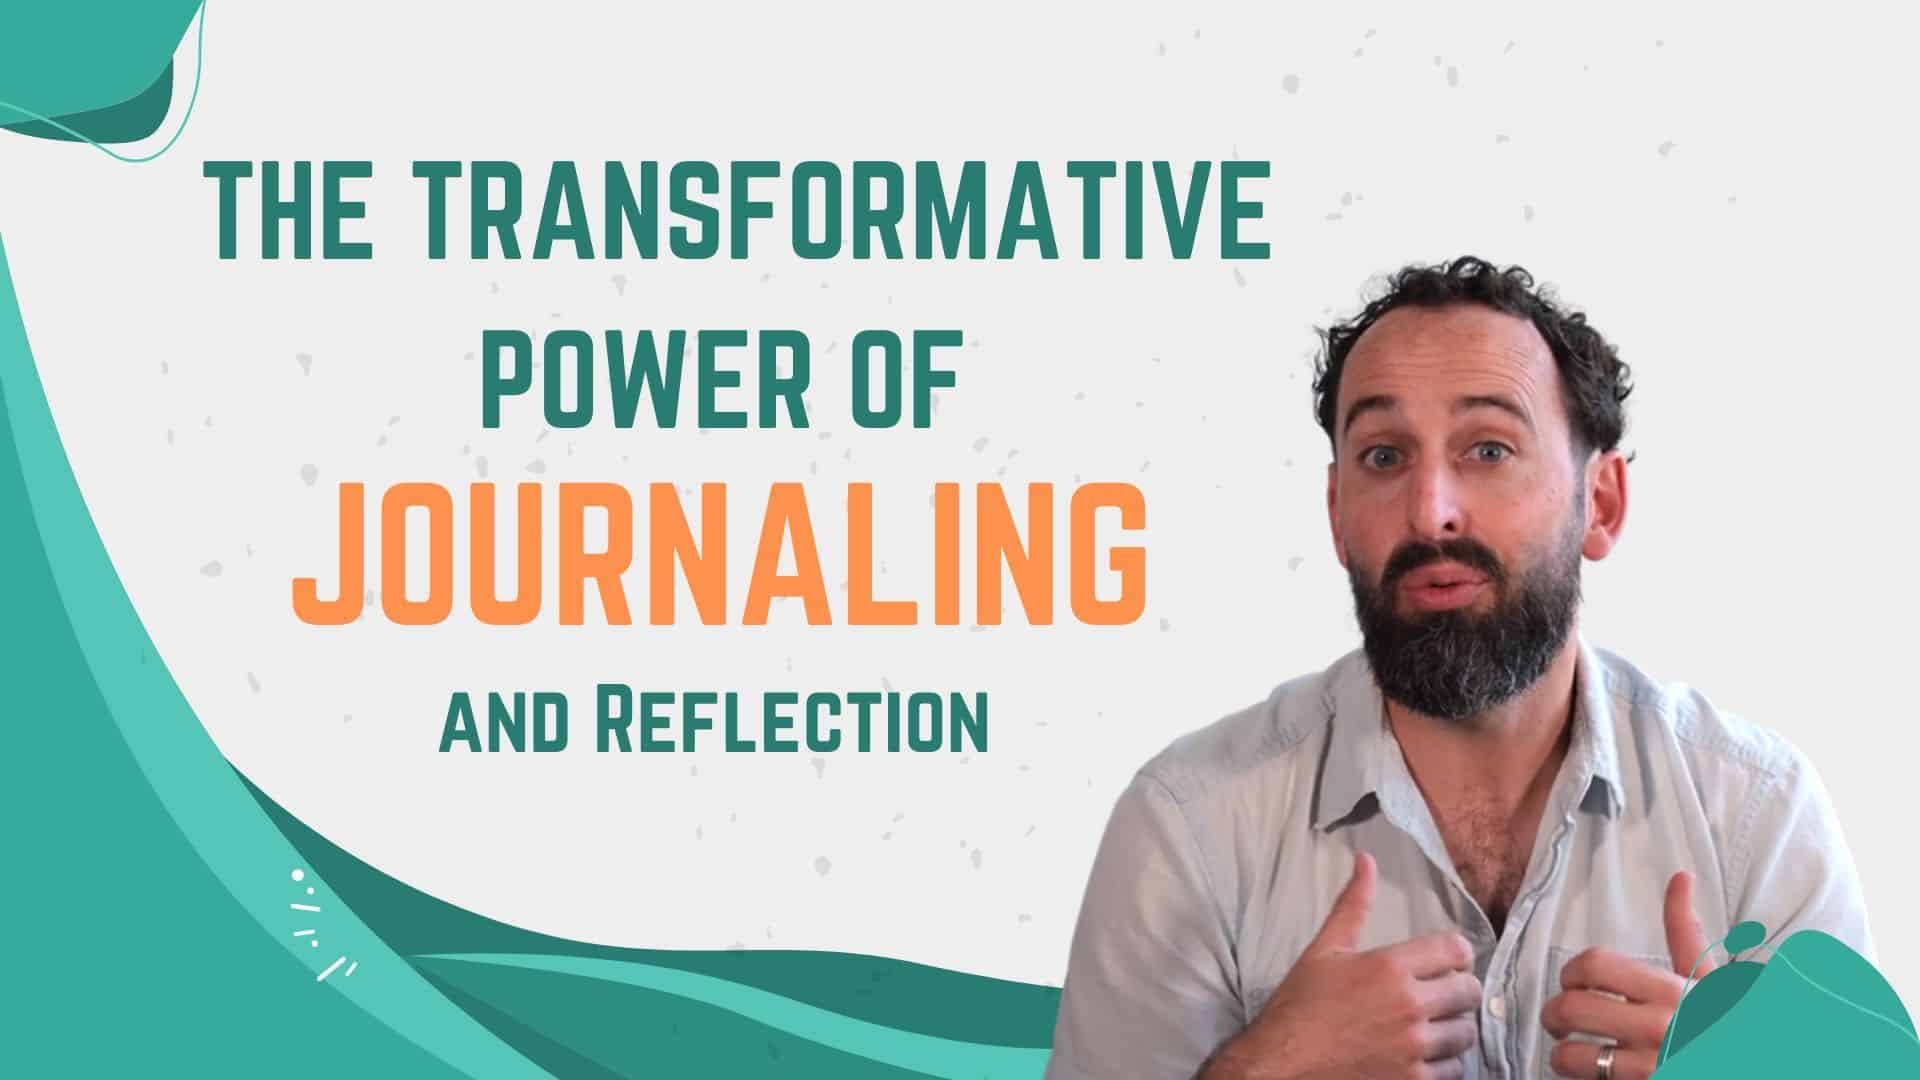 The Transformative Power of Journaling and Reflection - Kurtis Vanderpool